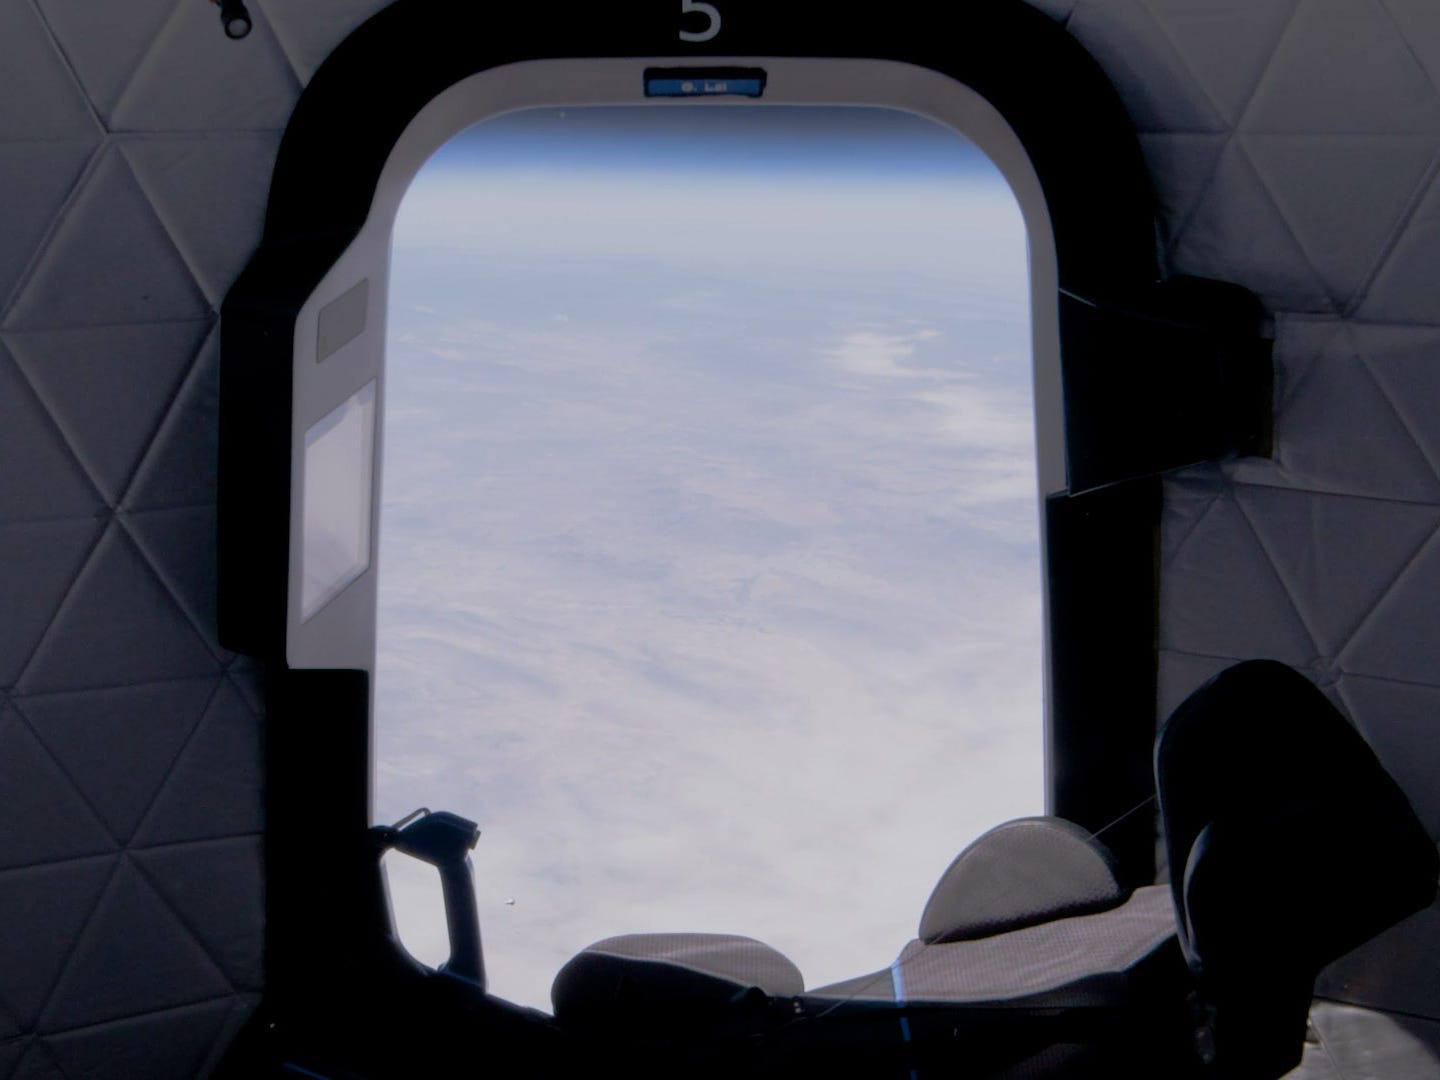 The view from space on New Shepard's 15th flight, April 14, 2021.